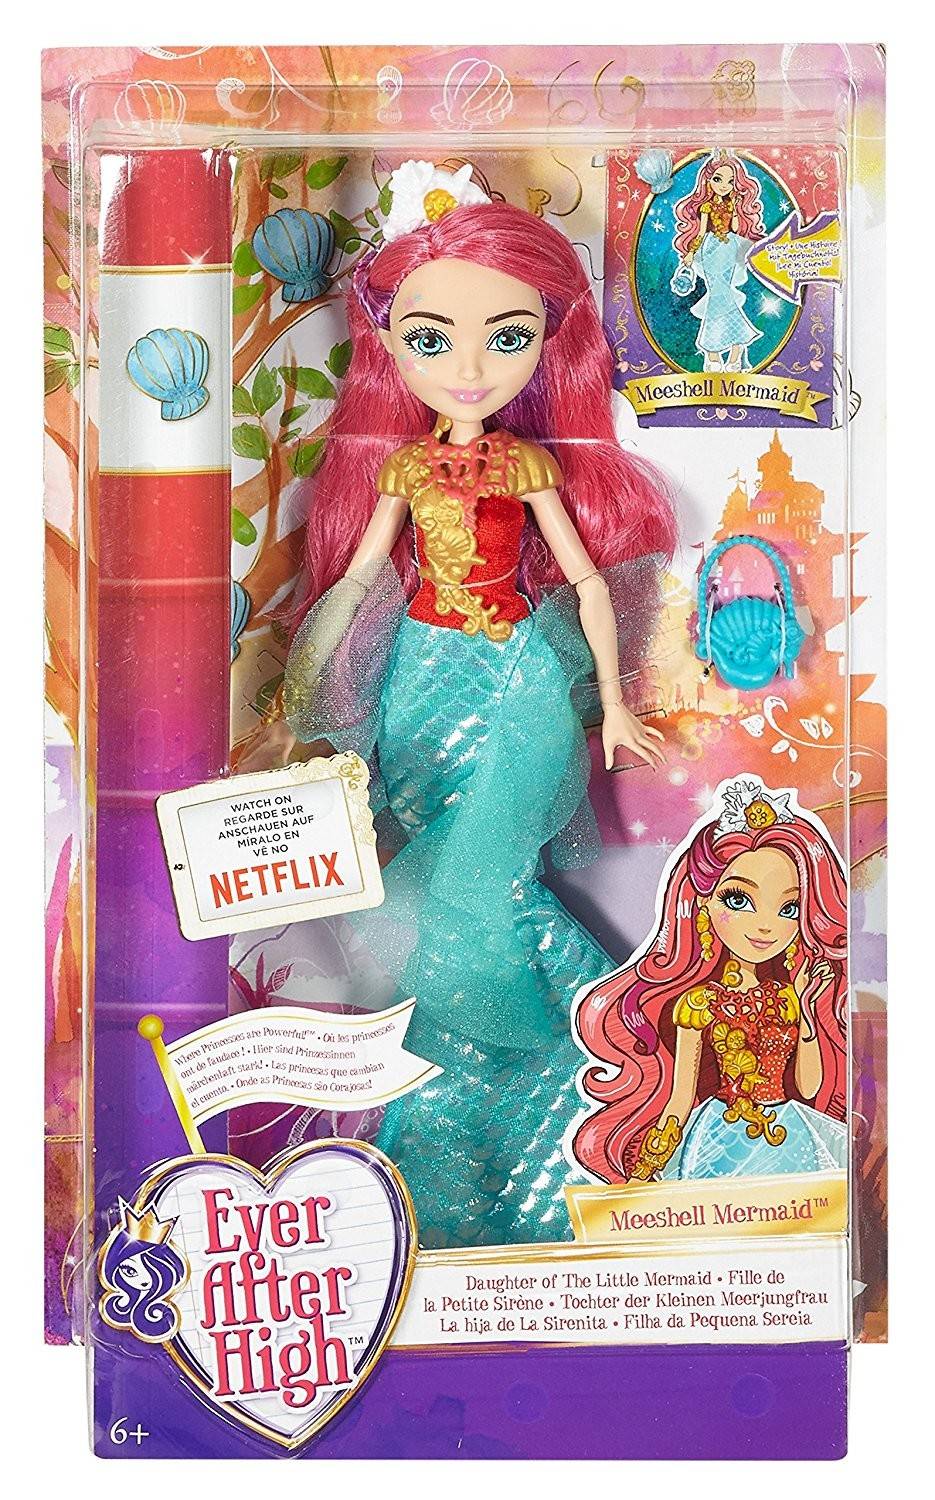 ever after high michelle mermaid doll